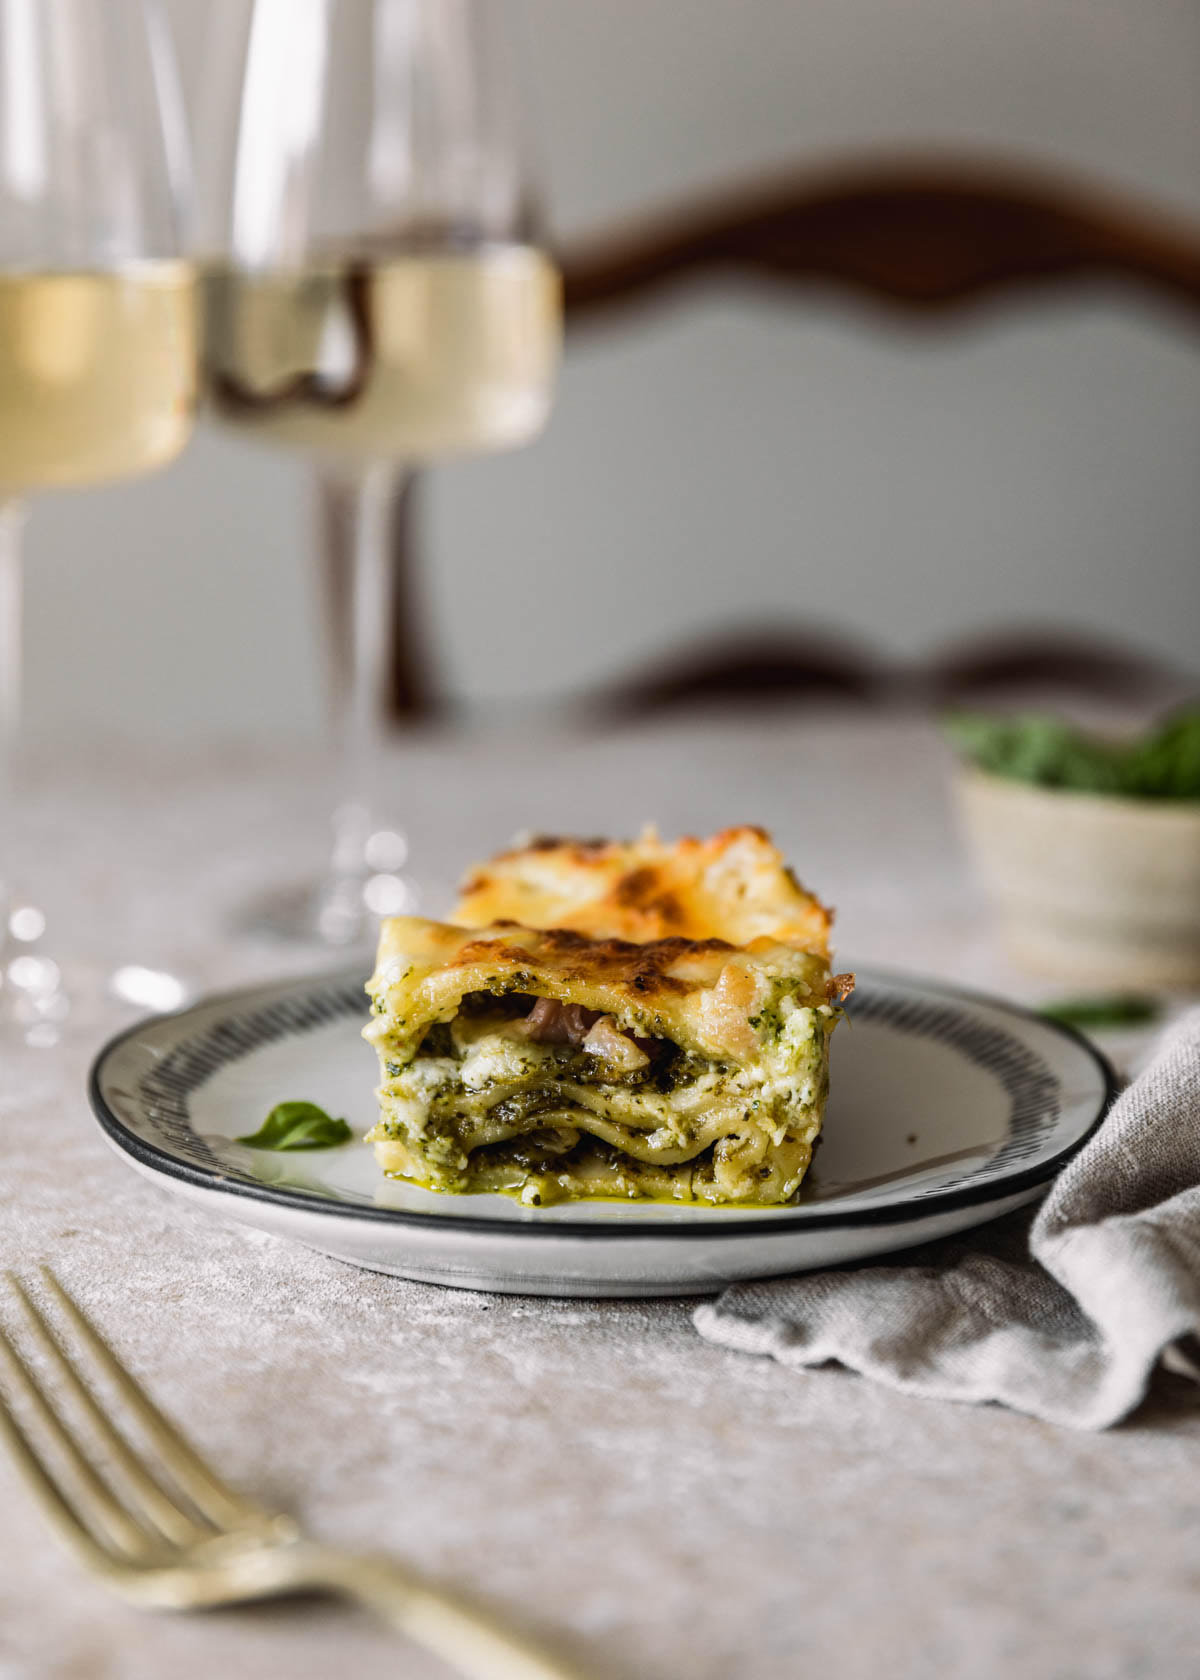 A side image of a white plate with a black rim topped with a slice of pesto white lasagna on a beige table. The plate is next to a beige linen, gold fork, and white bowl of pesto with a wood chair in the background.